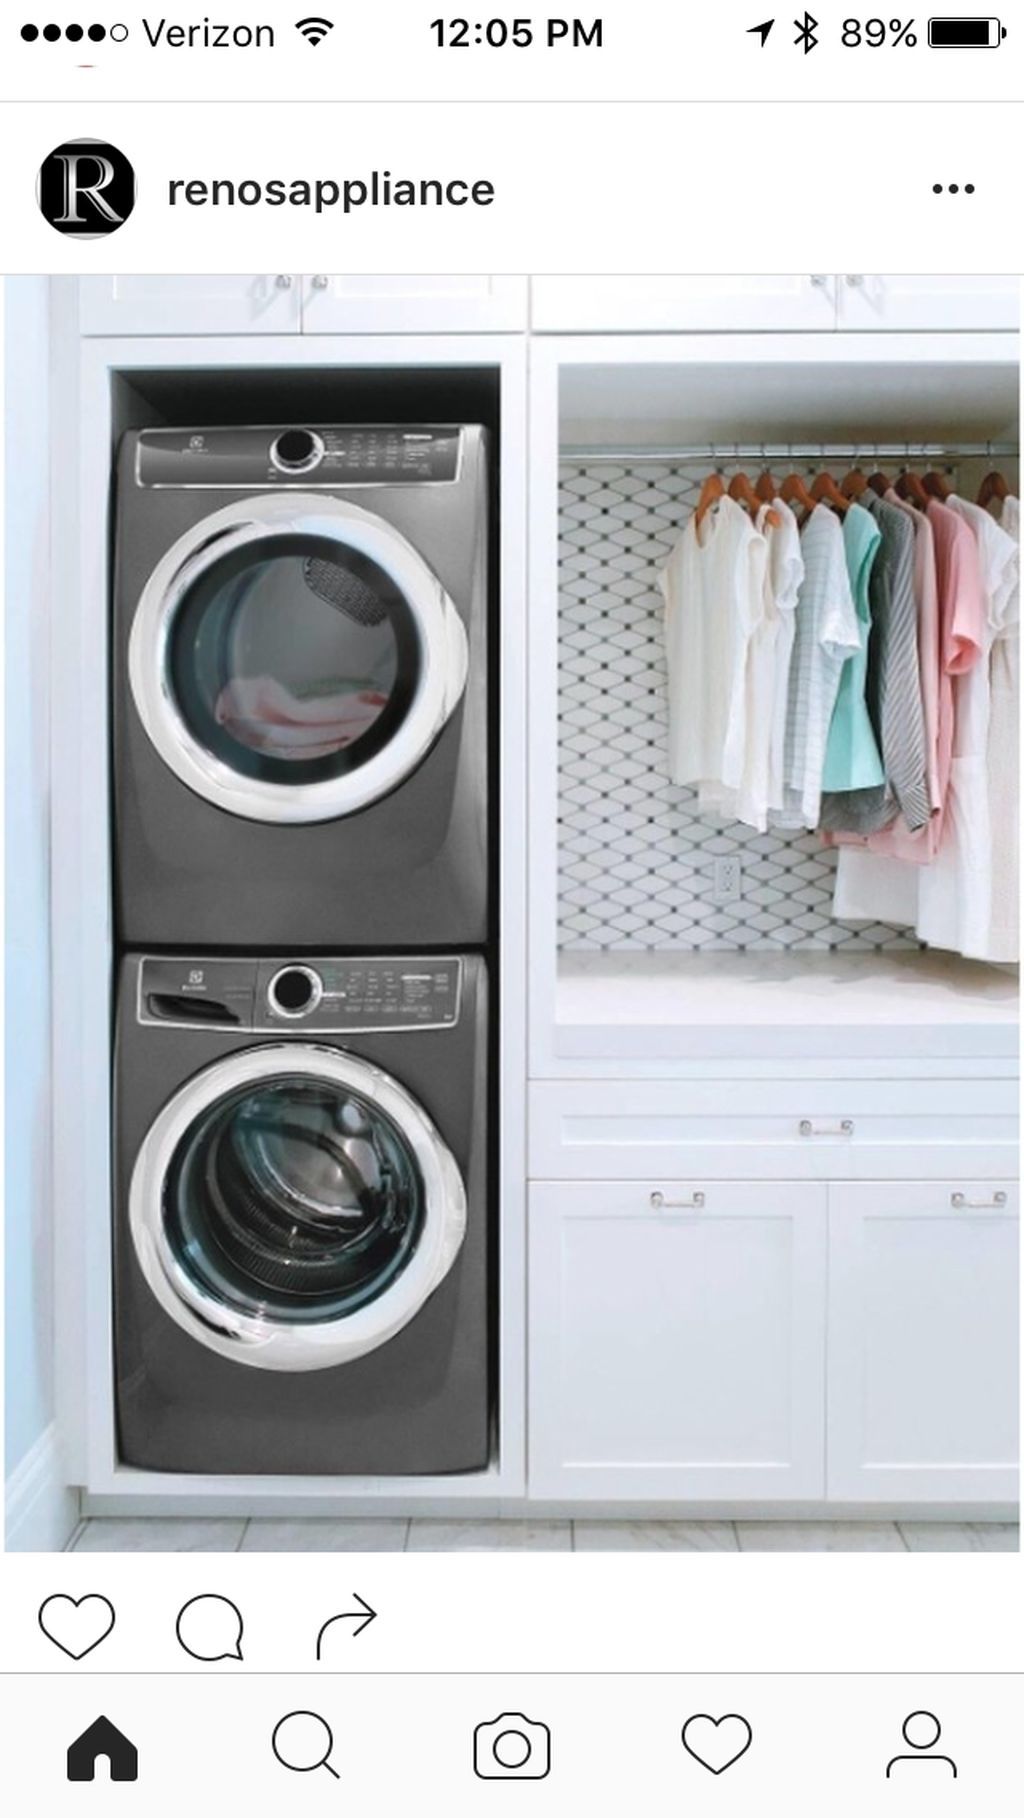 20+ Excellent Laundry Room D?cor Ideas To Be Inspiration -   10 room decor Inspiration layout ideas